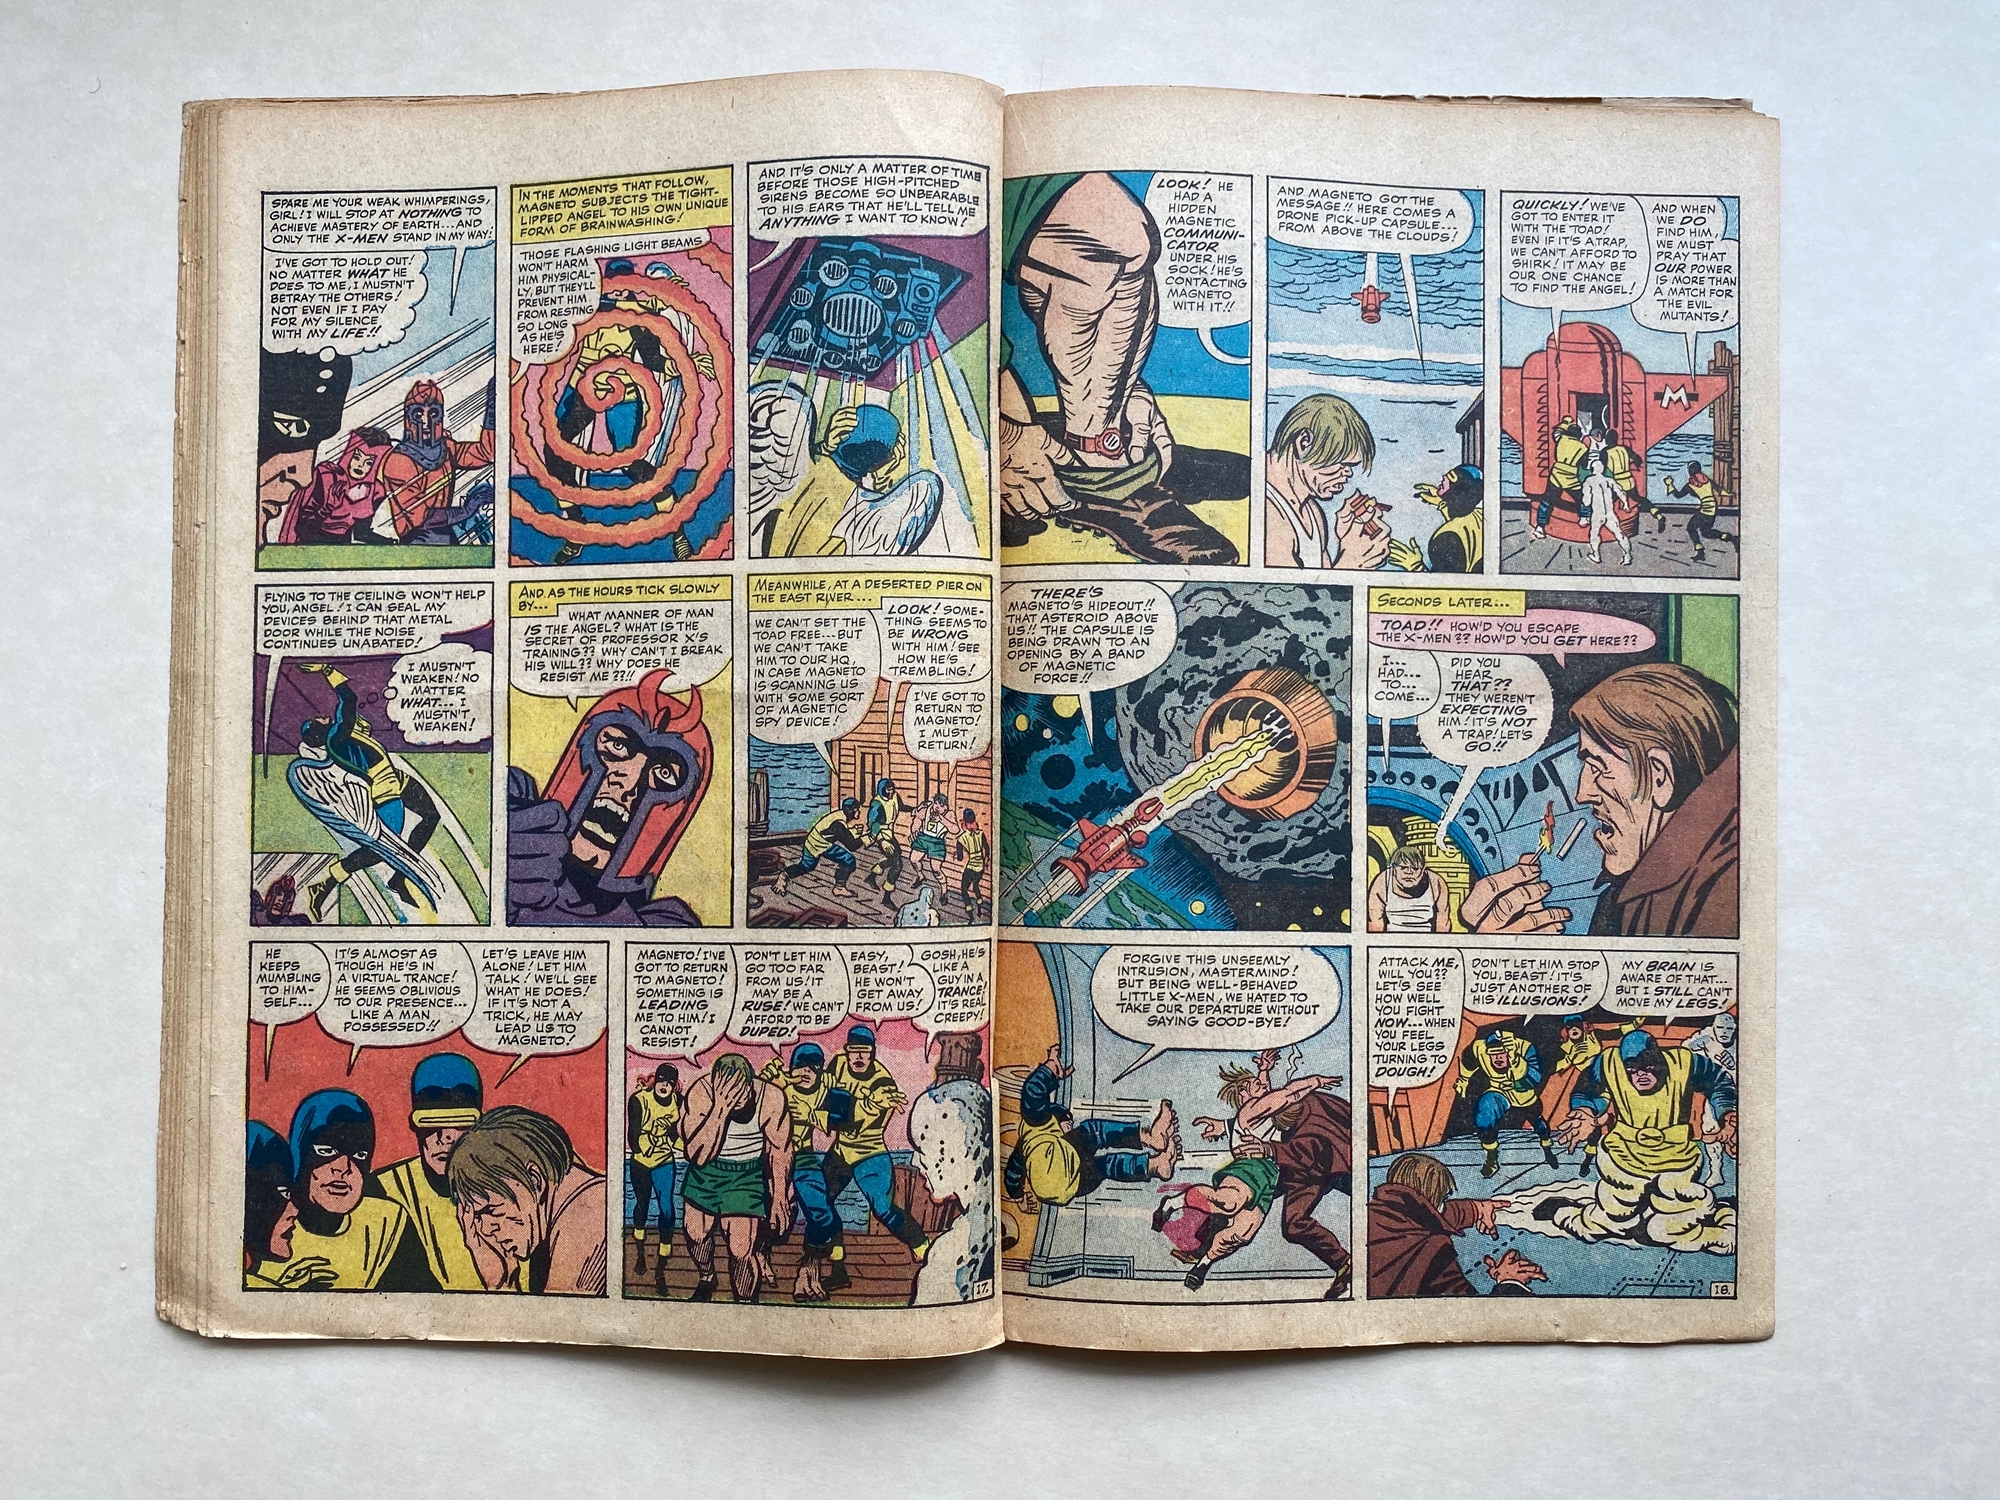 UNCANNY X-MEN #5 - (1964 - MARVEL - Pence Copy) - Third appearance of Magneto and the second - Image 9 of 10